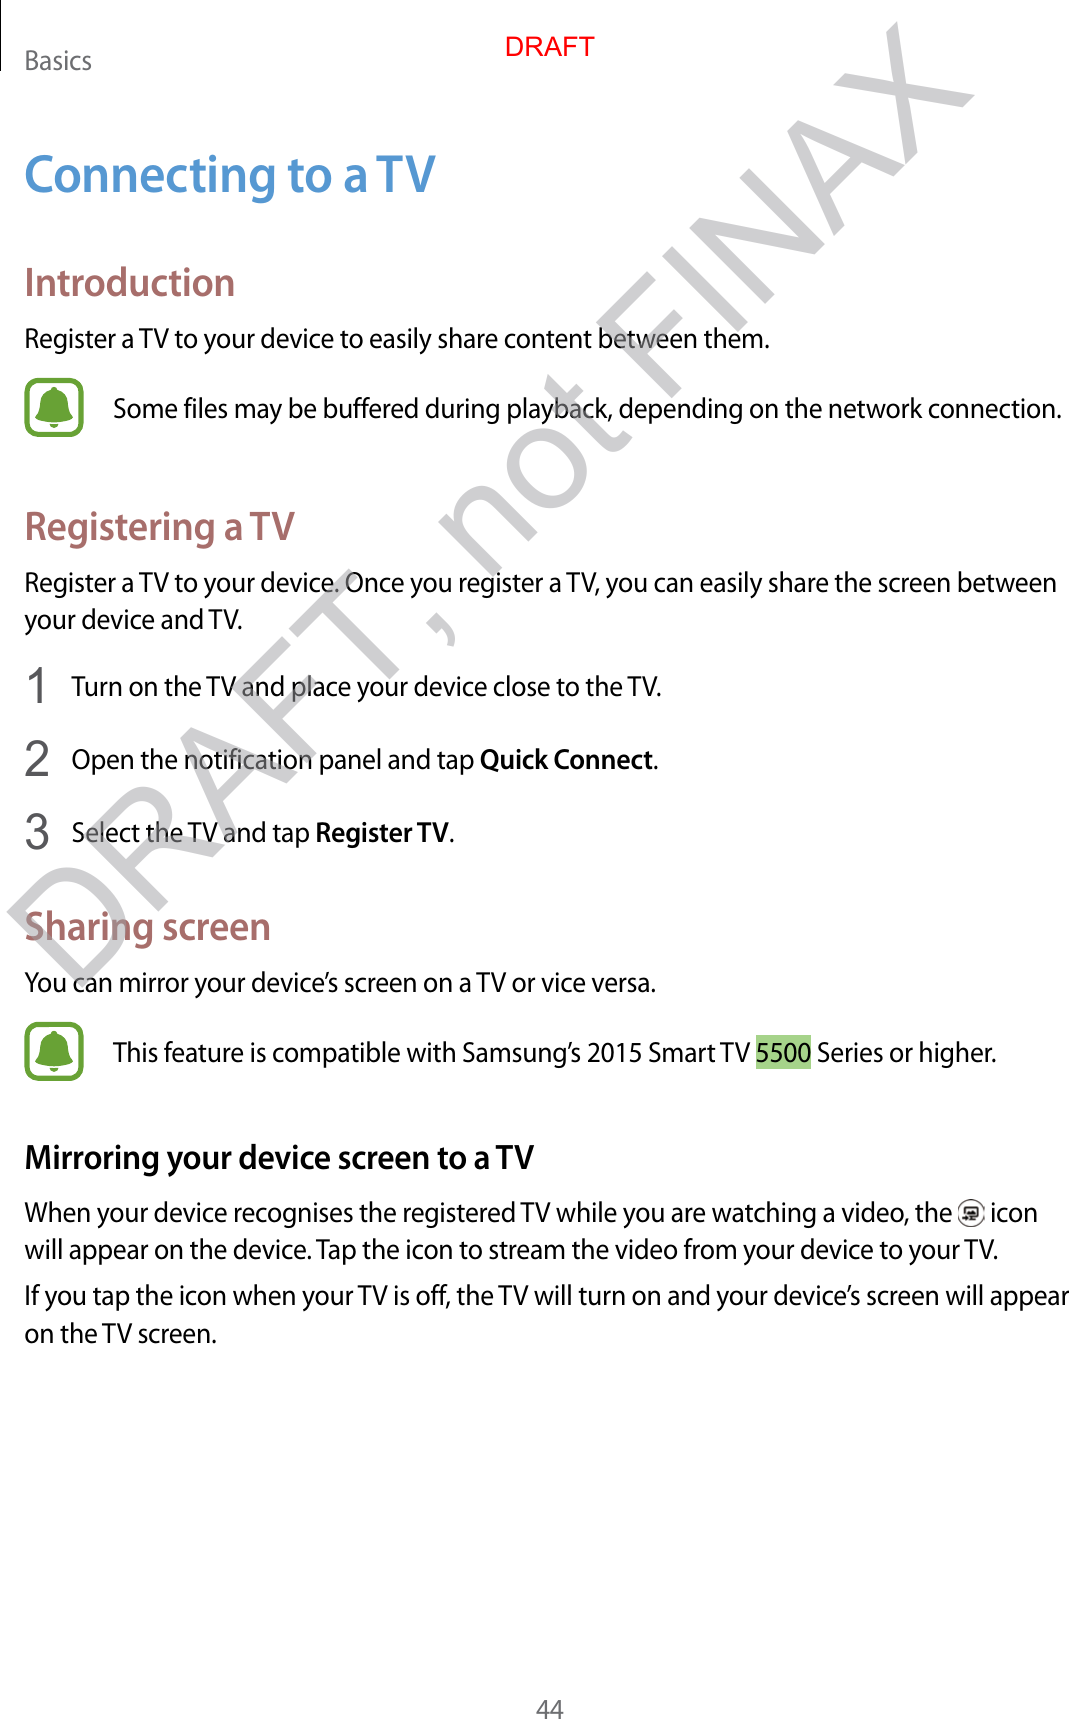 Basics44Connecting to a TVIntroductionRegister a TV to your device to easily share content between them.Some files may be buffered during playback, depending on the network connection.Registering a TVRegister a TV to your device. Once you register a TV, you can easily share the screen between your device and TV.1  Turn on the TV and place your device close to the TV.2  Open the notification panel and tap Quick Connect.3  Select the TV and tap Register TV.Sharing screenYou can mirror your device’s screen on a TV or vice versa.This feature is compatible with Samsung’s 2015 Smart TV 5500 Series or higher.Mirroring your device screen to a TVWhen your device recognises the registered TV while you are watching a video, the   icon will appear on the device. Tap the icon to stream the video from your device to your TV.If you tap the icon when your TV is off, the TV will turn on and your device’s screen will appear on the TV screen.DRAFTDRAFT, not FINAX